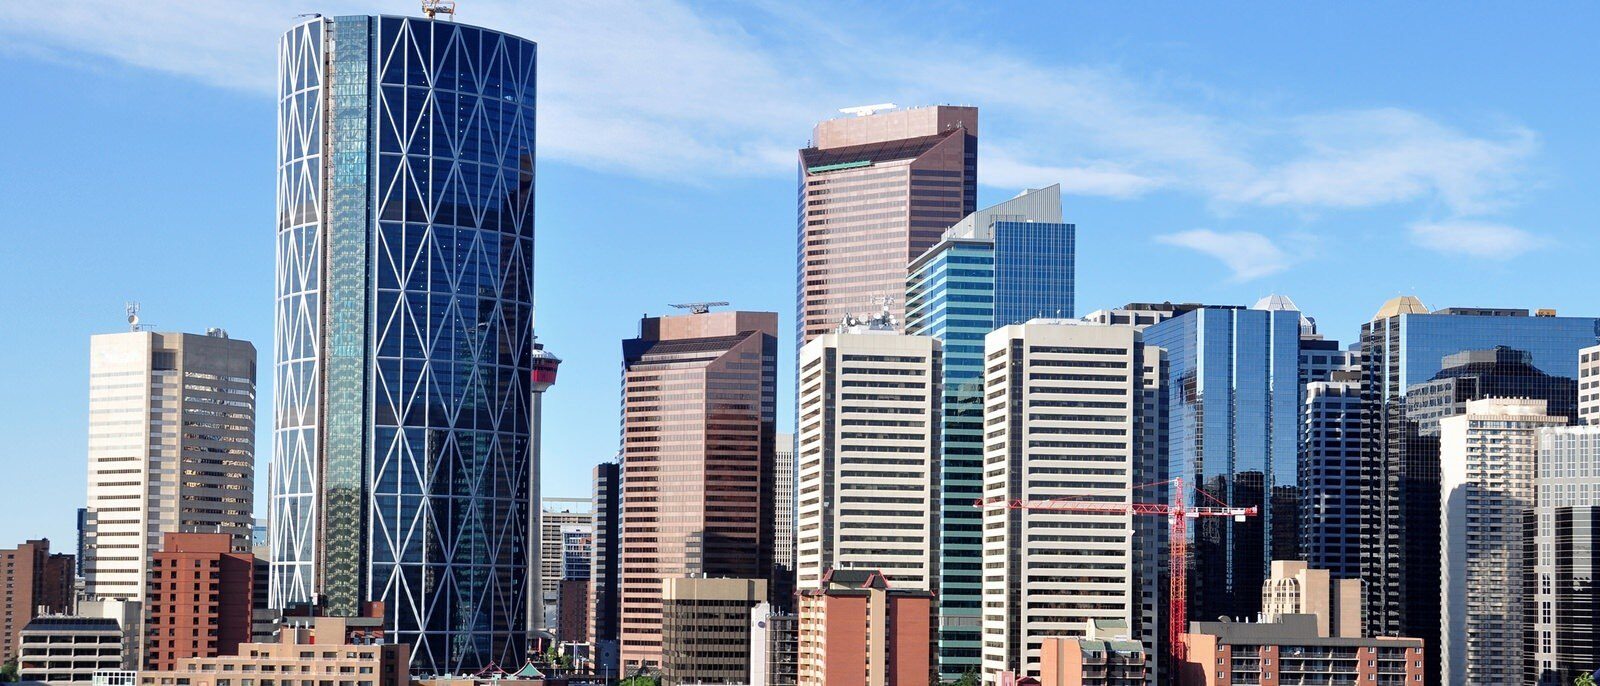 A view of a skyline in a large city that has some tall buildings and a red crane.